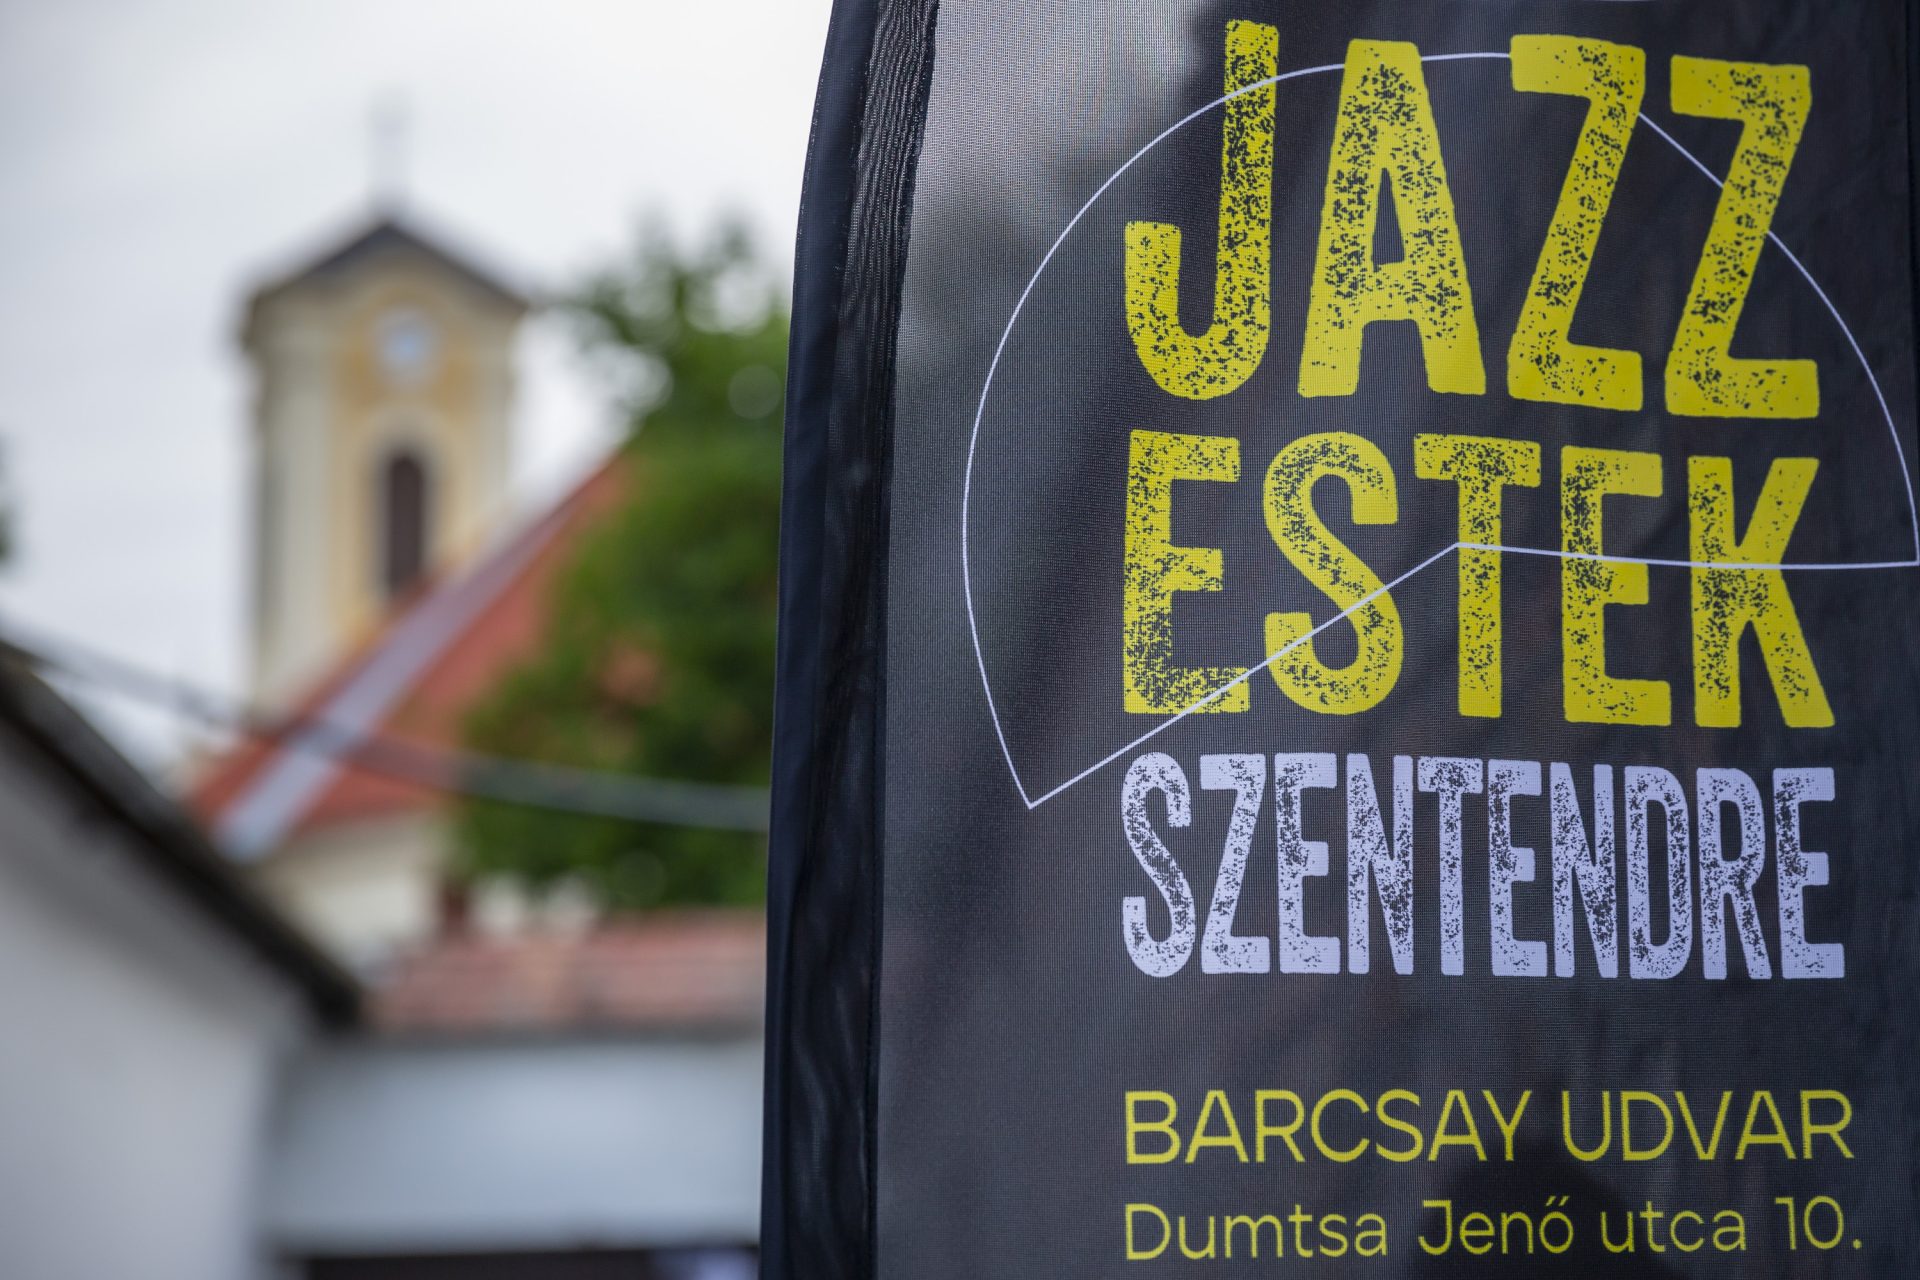 Eight concerts at Szentendre Jazz Evenings – IPOLYINFO